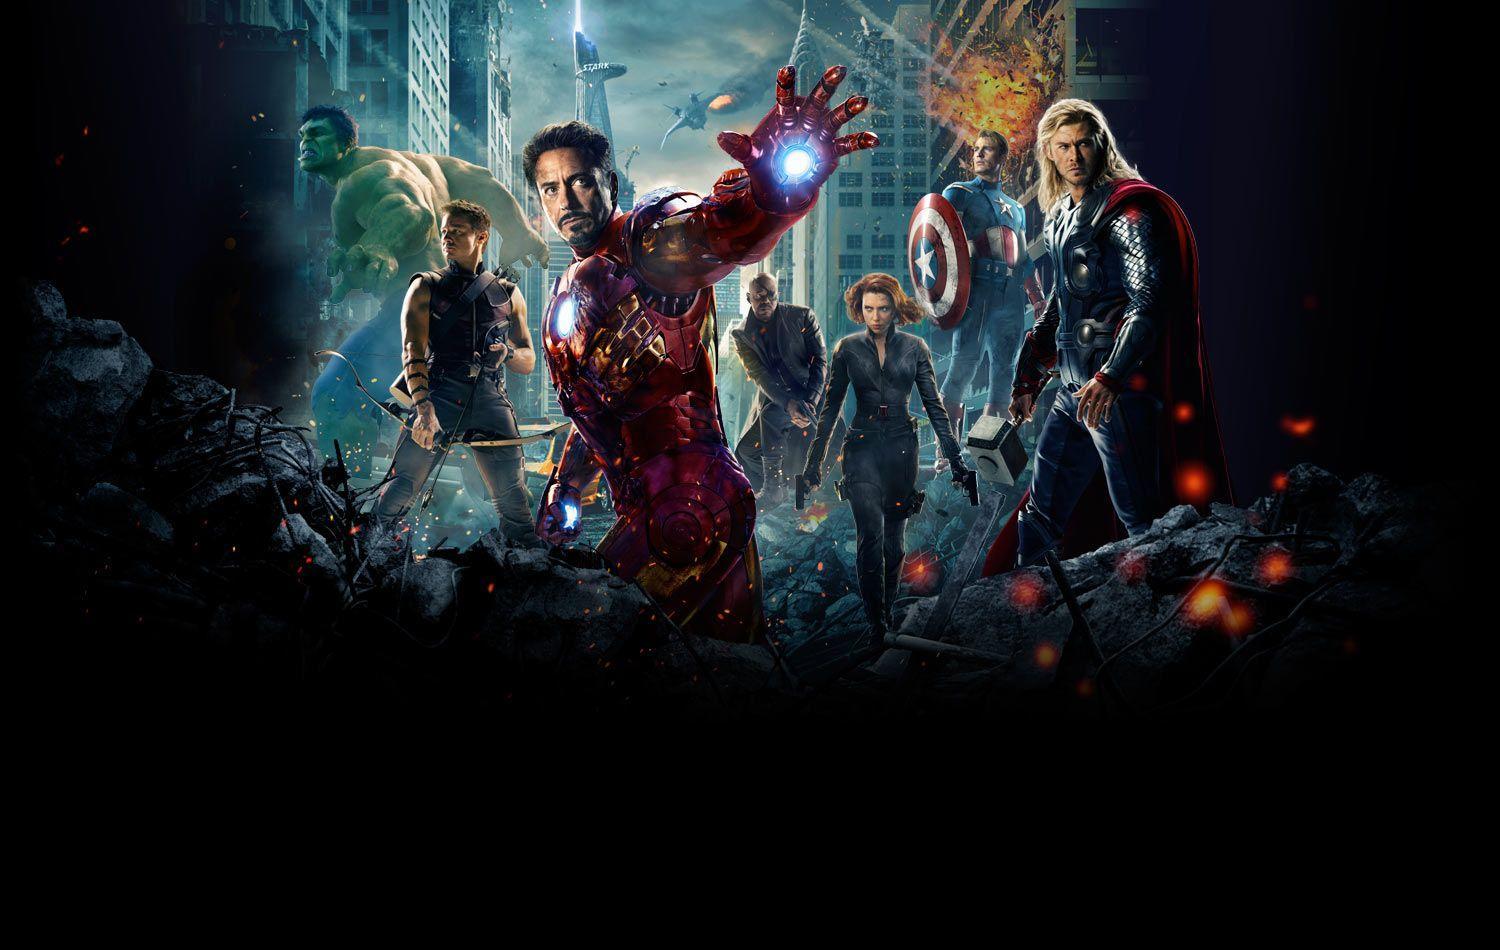 Awesome Avengers 2 Wallpaper